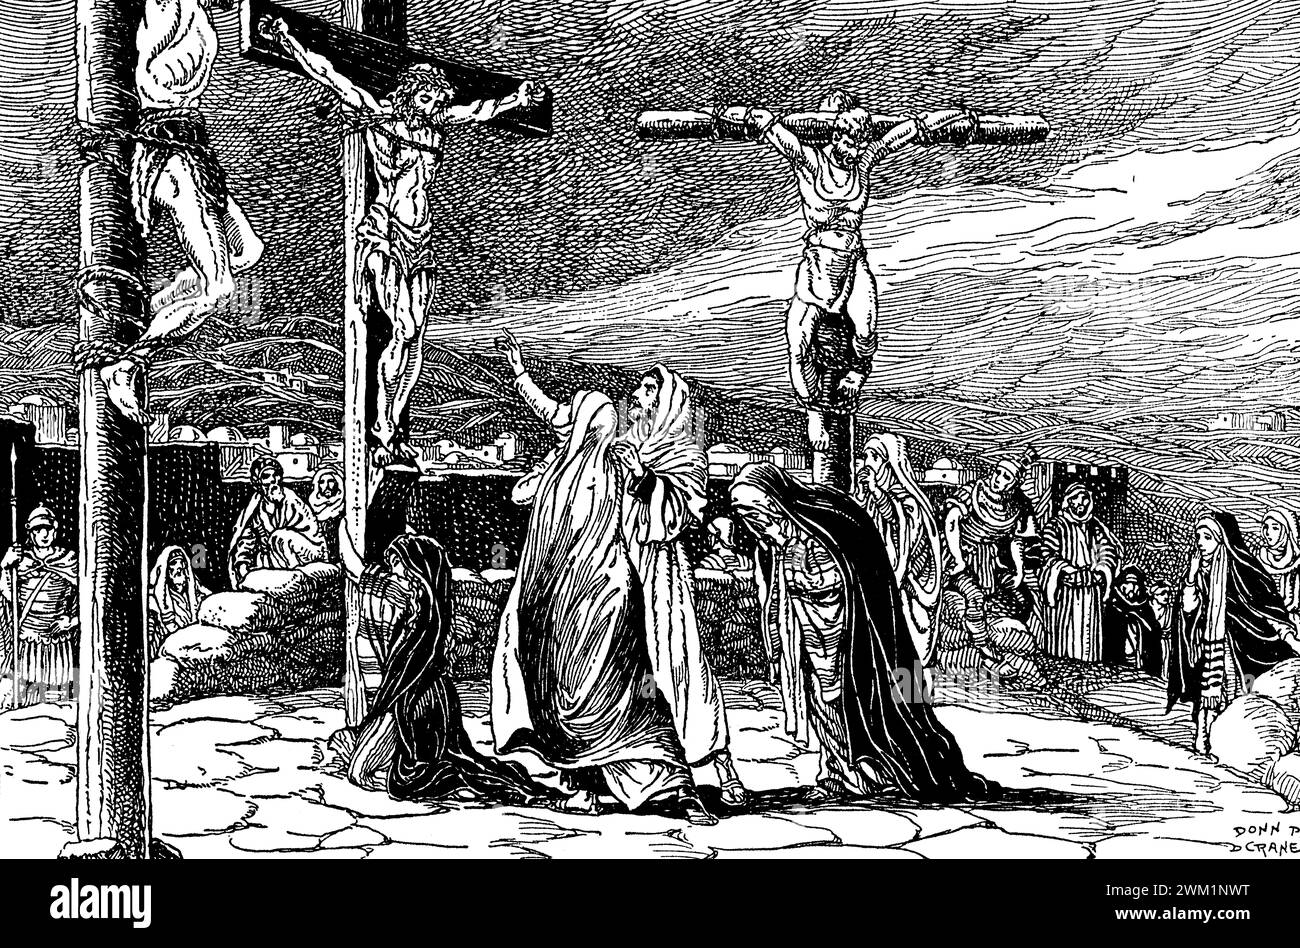 The crucifixion of Jesus of Nazareth. By Donn Philip Crane (1878-1944). Collectively referred to as the Passion, Jesus's suffering and redemptive death by crucifixion are the central aspects of Christian theology concerning the doctrines of salvation and atonement. Stock Photo